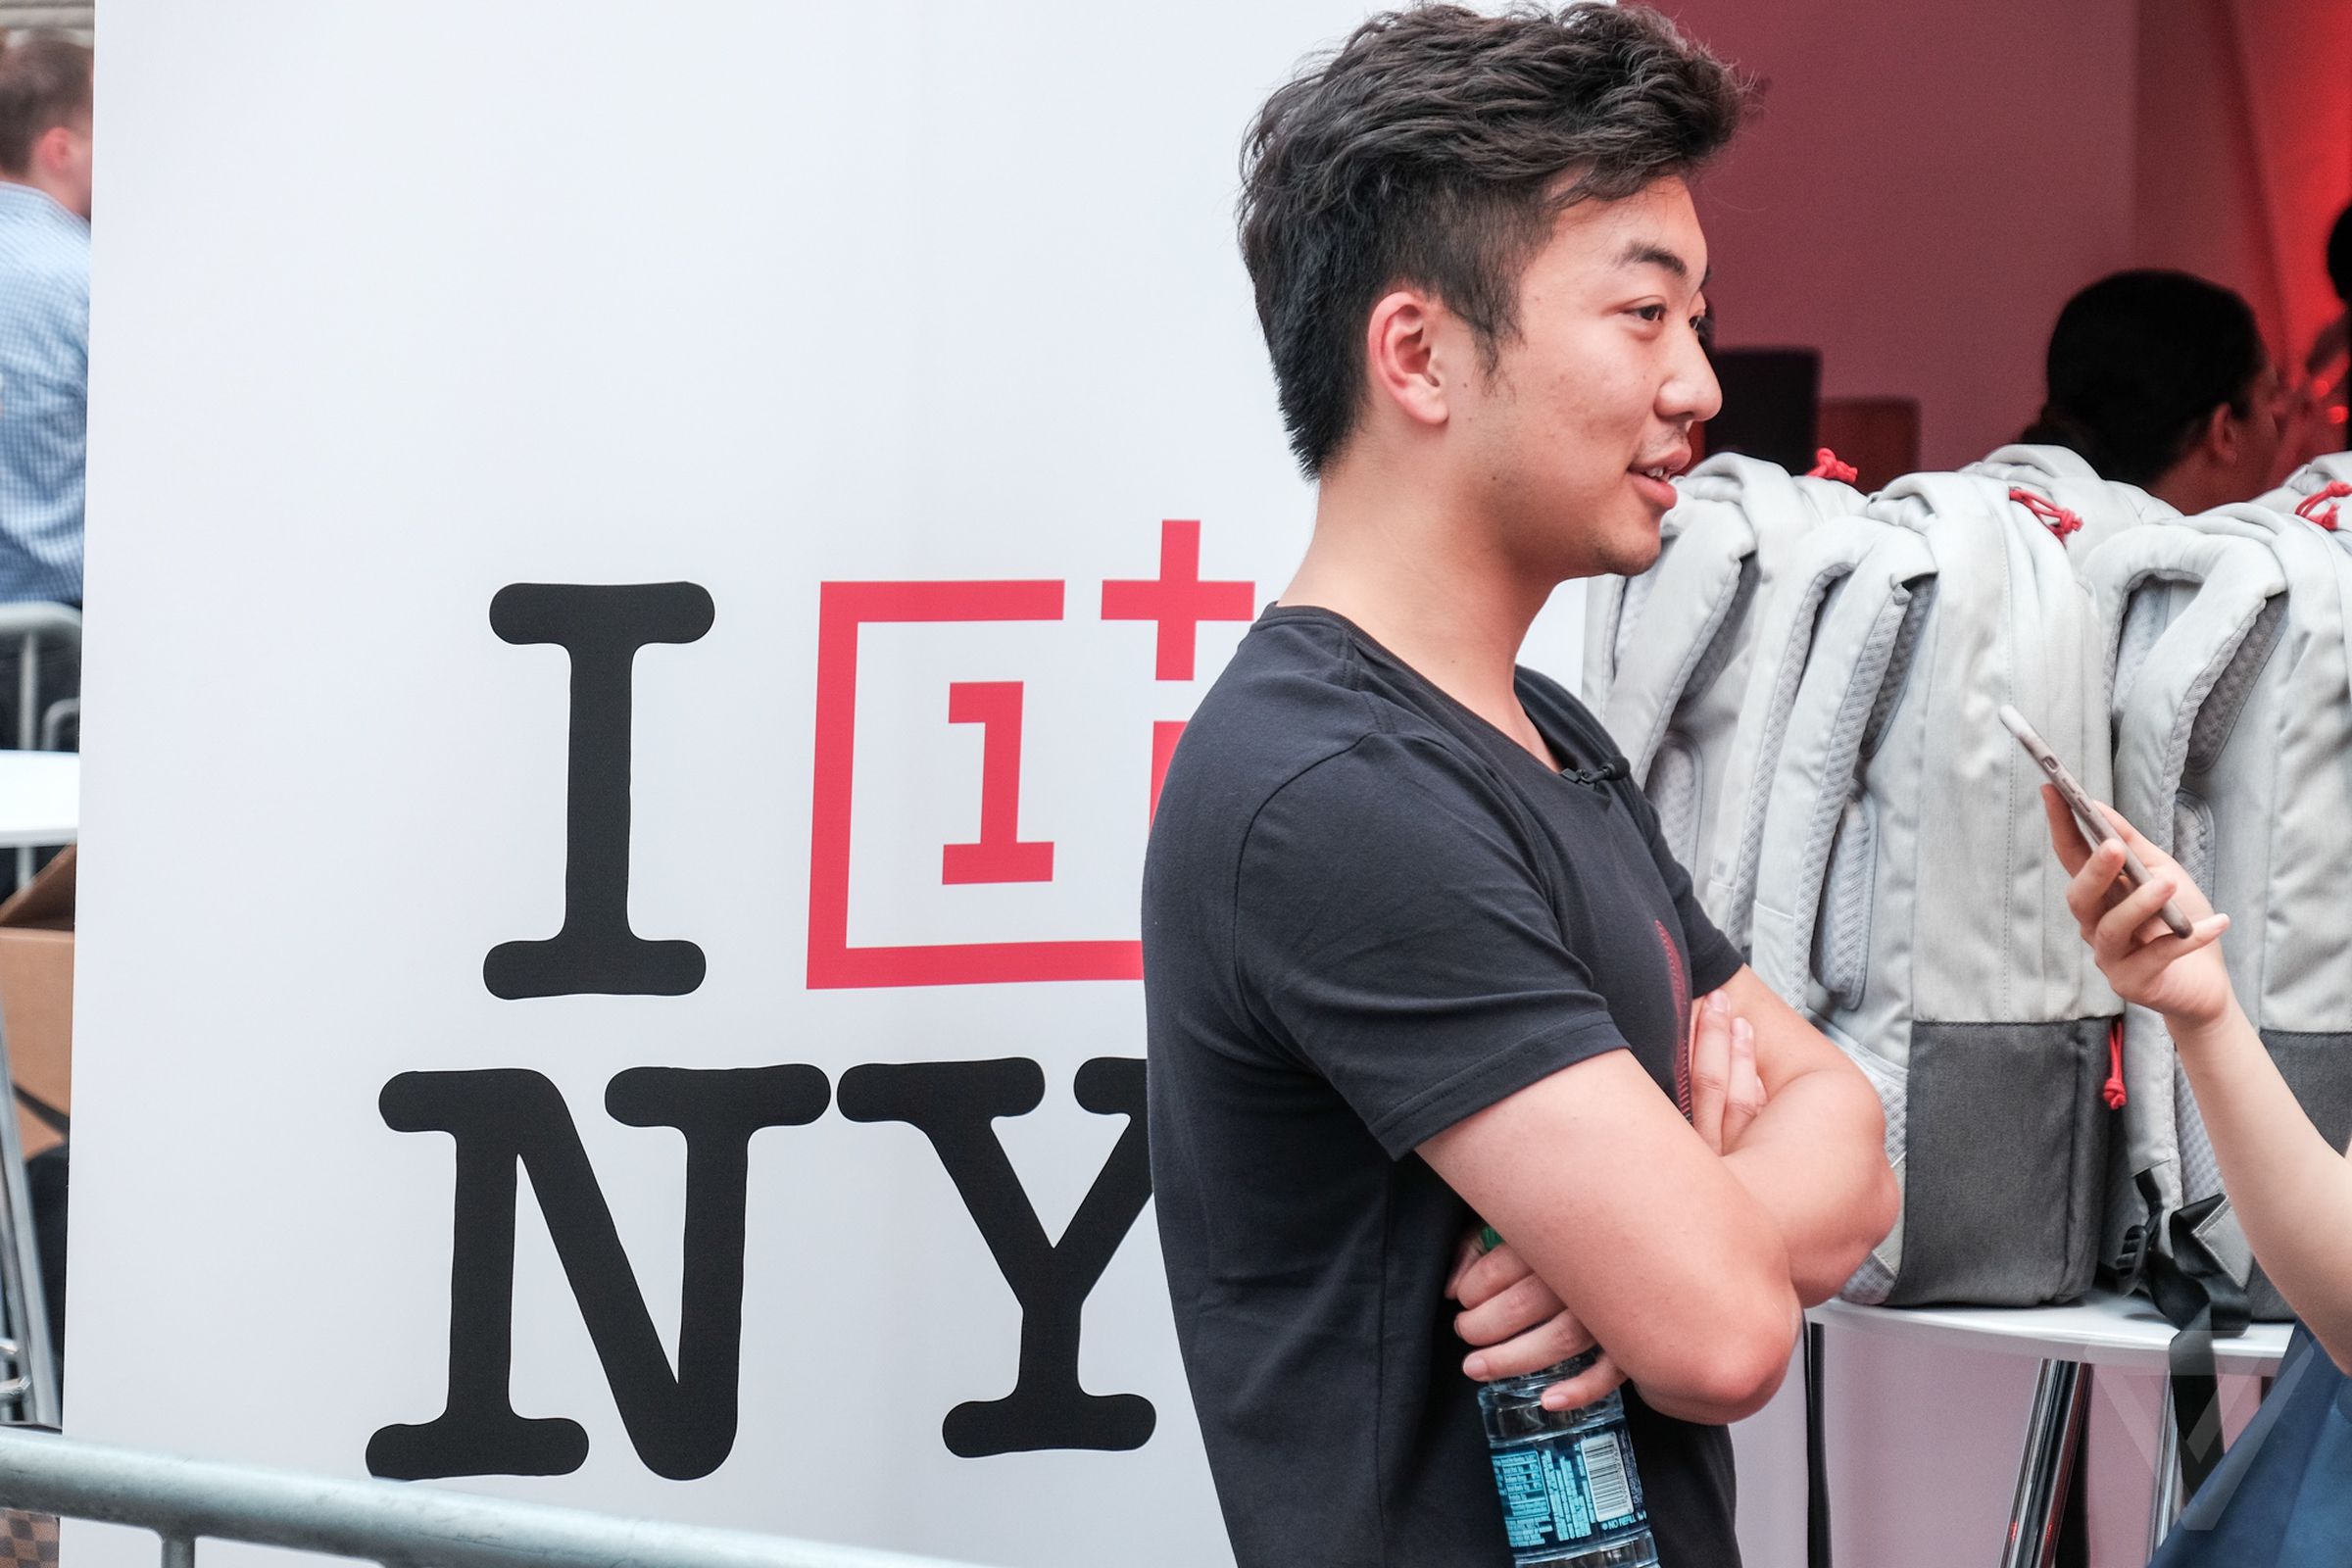 OnePlus co-founder Carl Pei in 2015.